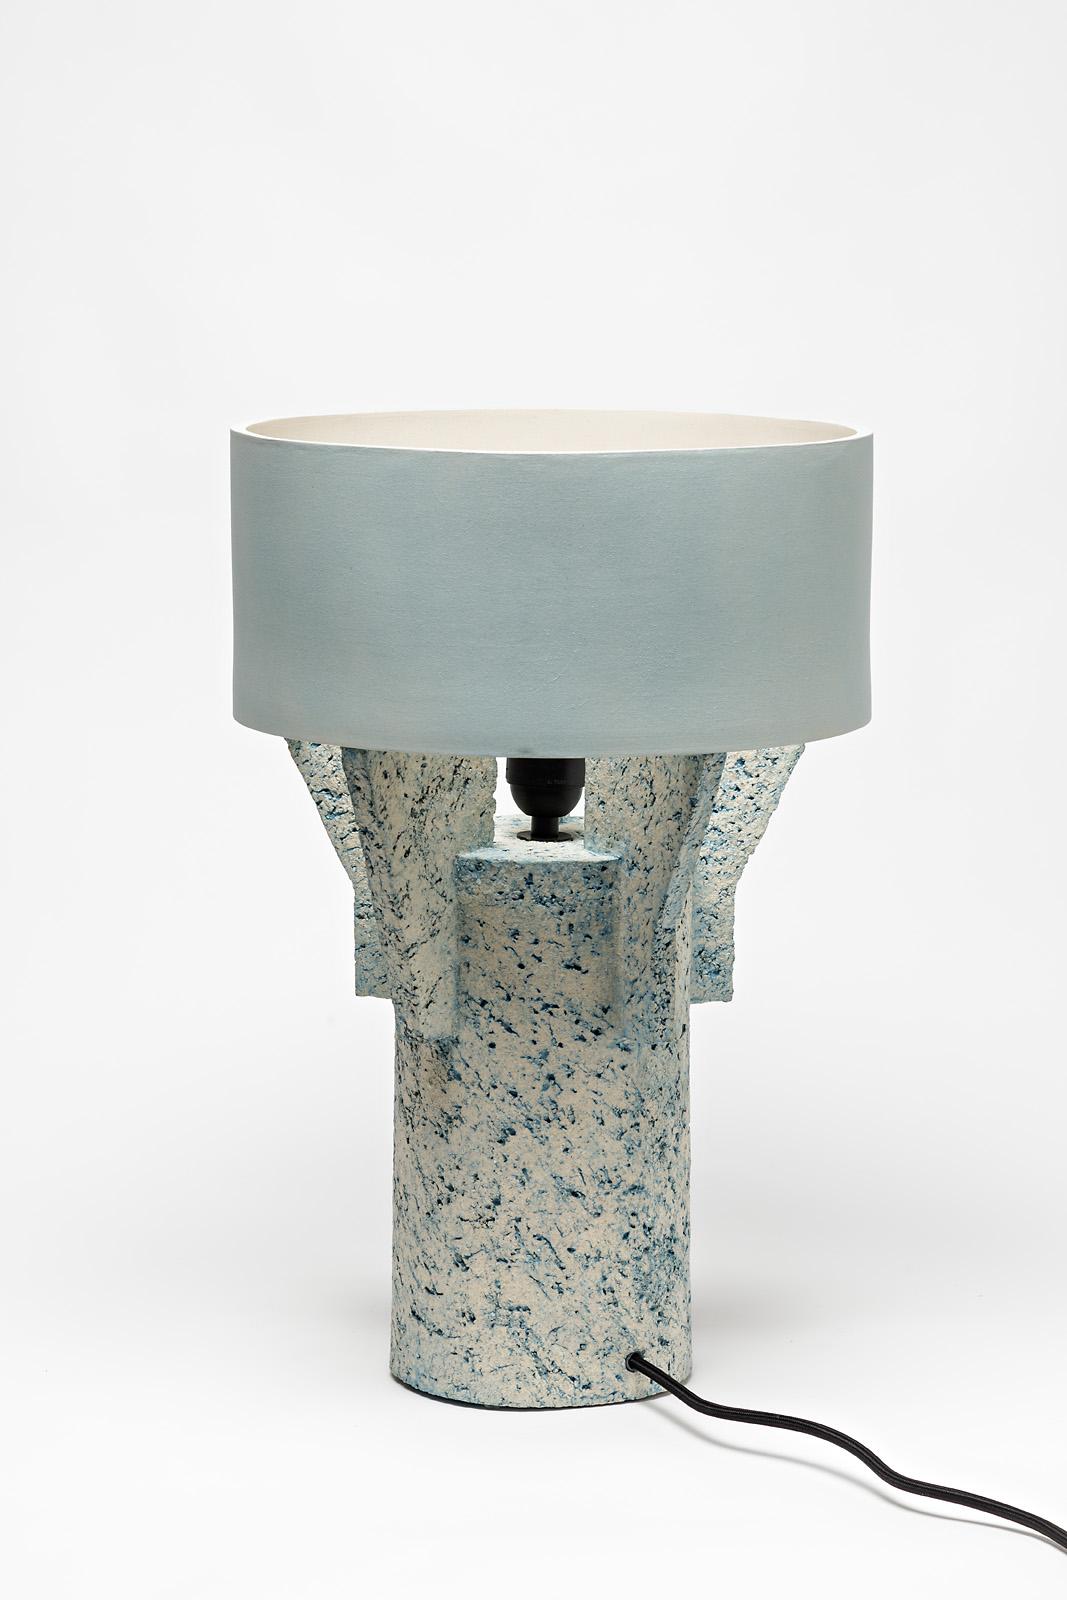 Beaux Arts Ceramic Table Lamp by Denis Castaing with Blue Glaze Decoration, 2019 For Sale